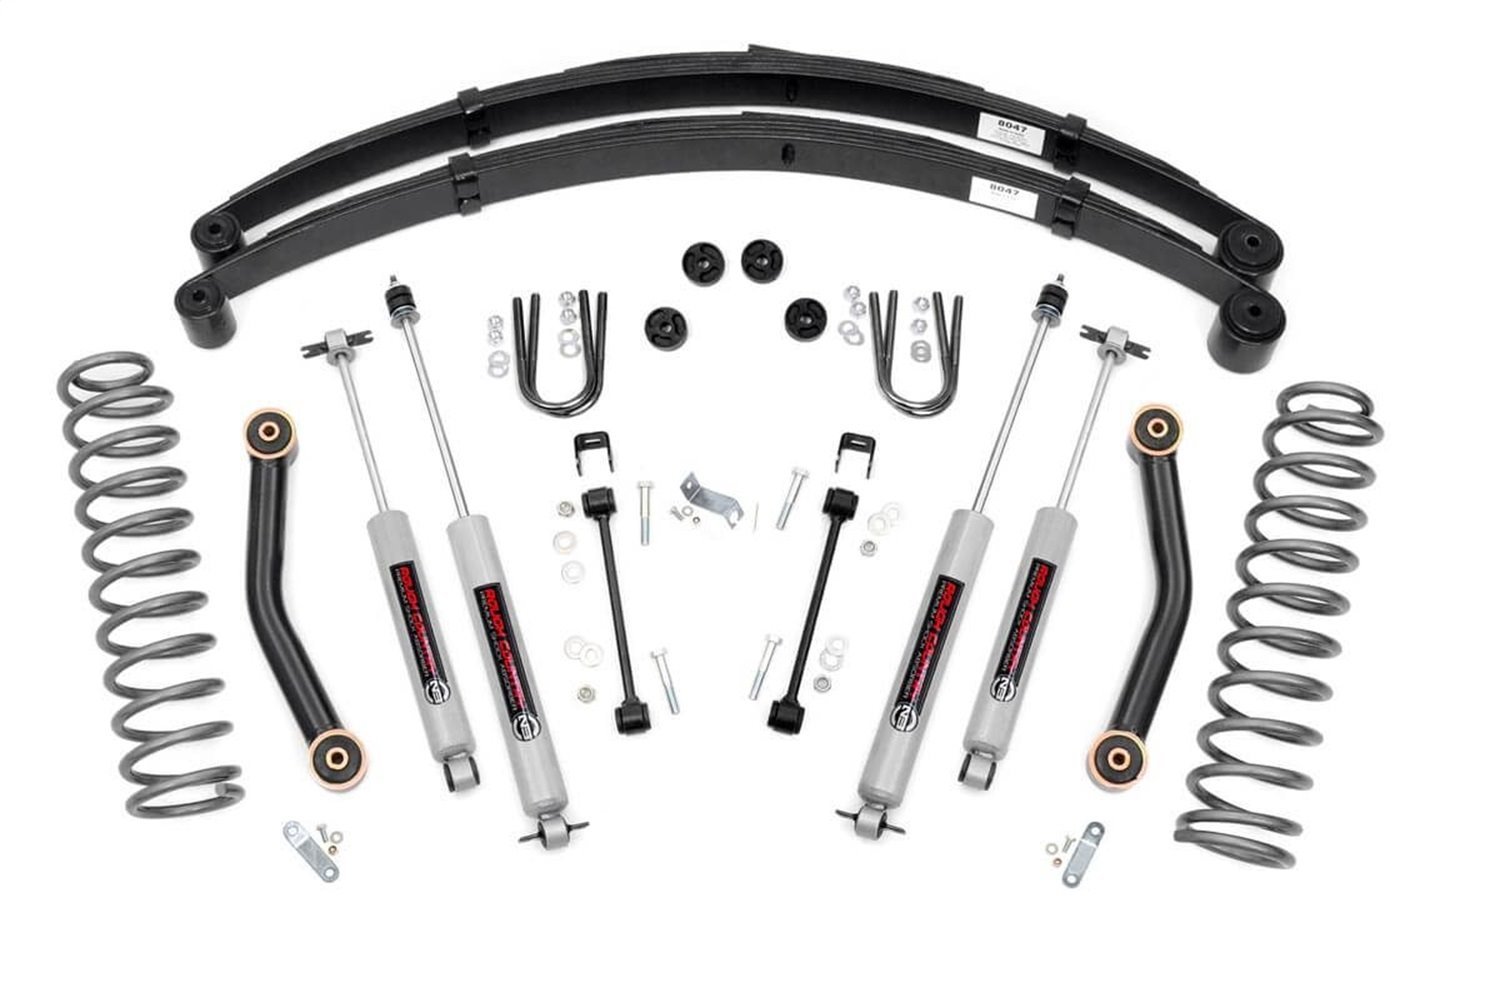 633N2 4.5-inch Suspension Lift System